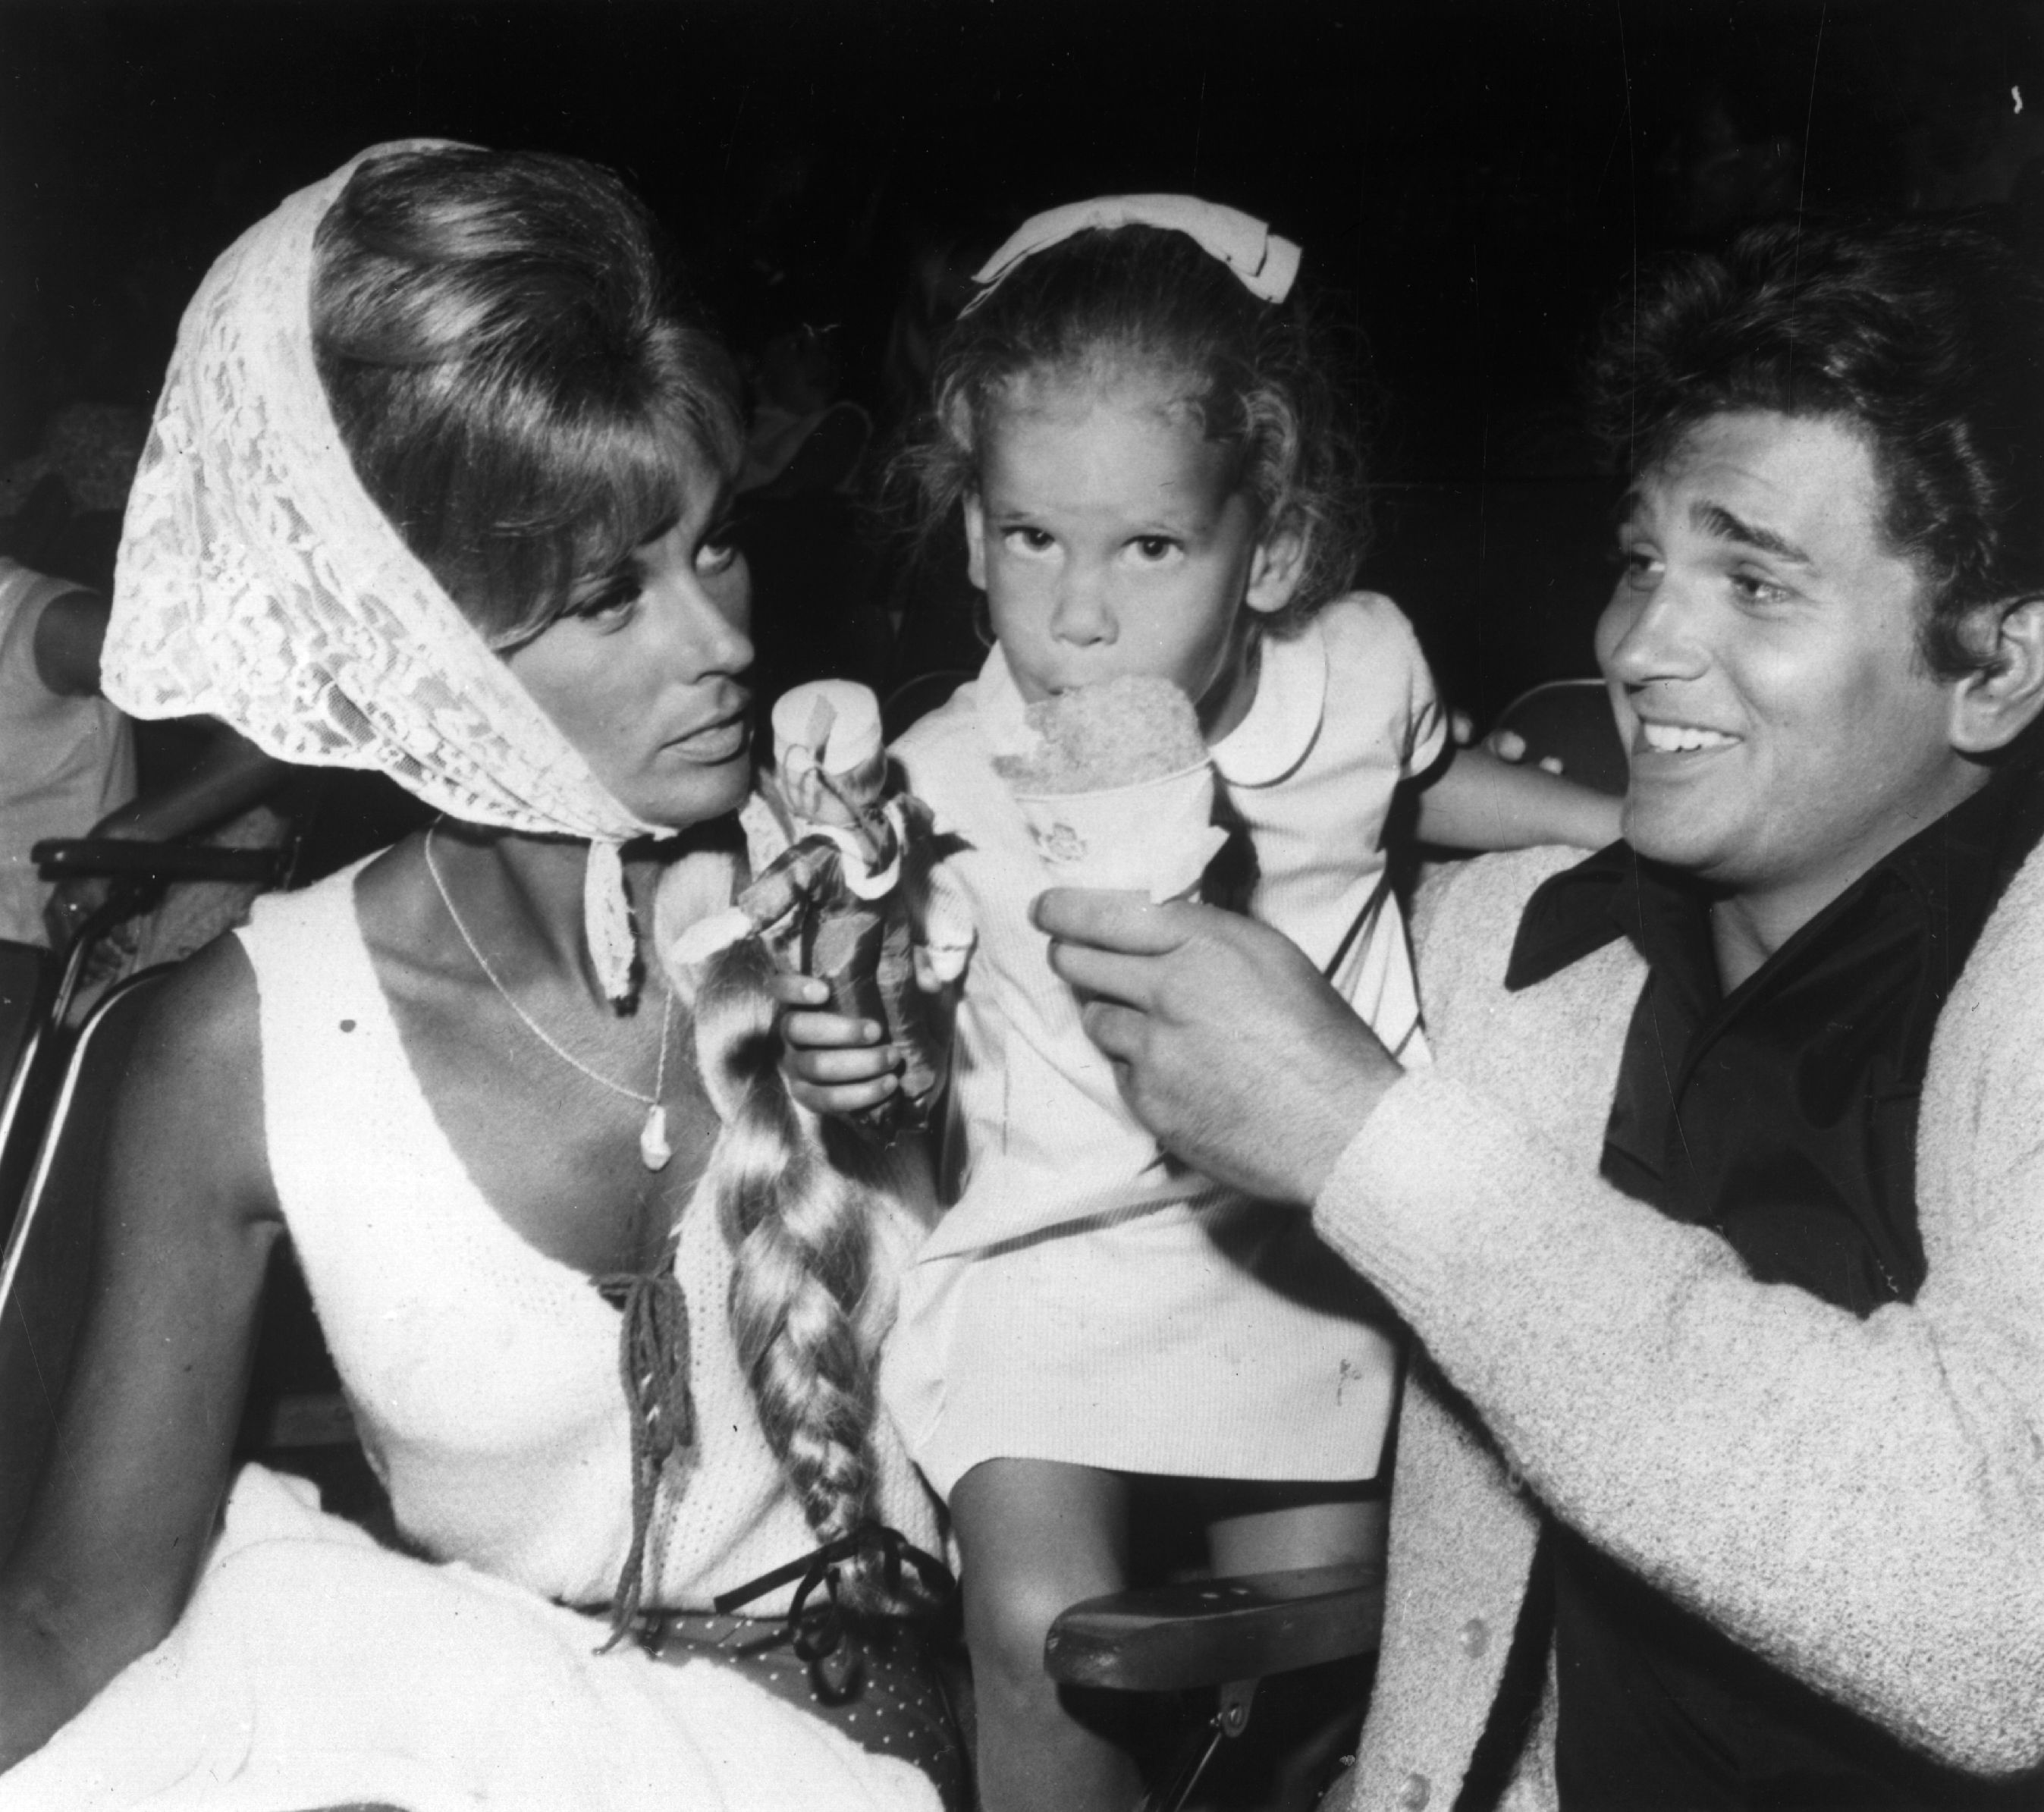 Marjorie Lynn Noe, Cheryl, and Michael Landon posing for a photo on August 24, 1965. | Source: Keystone/Getty Images